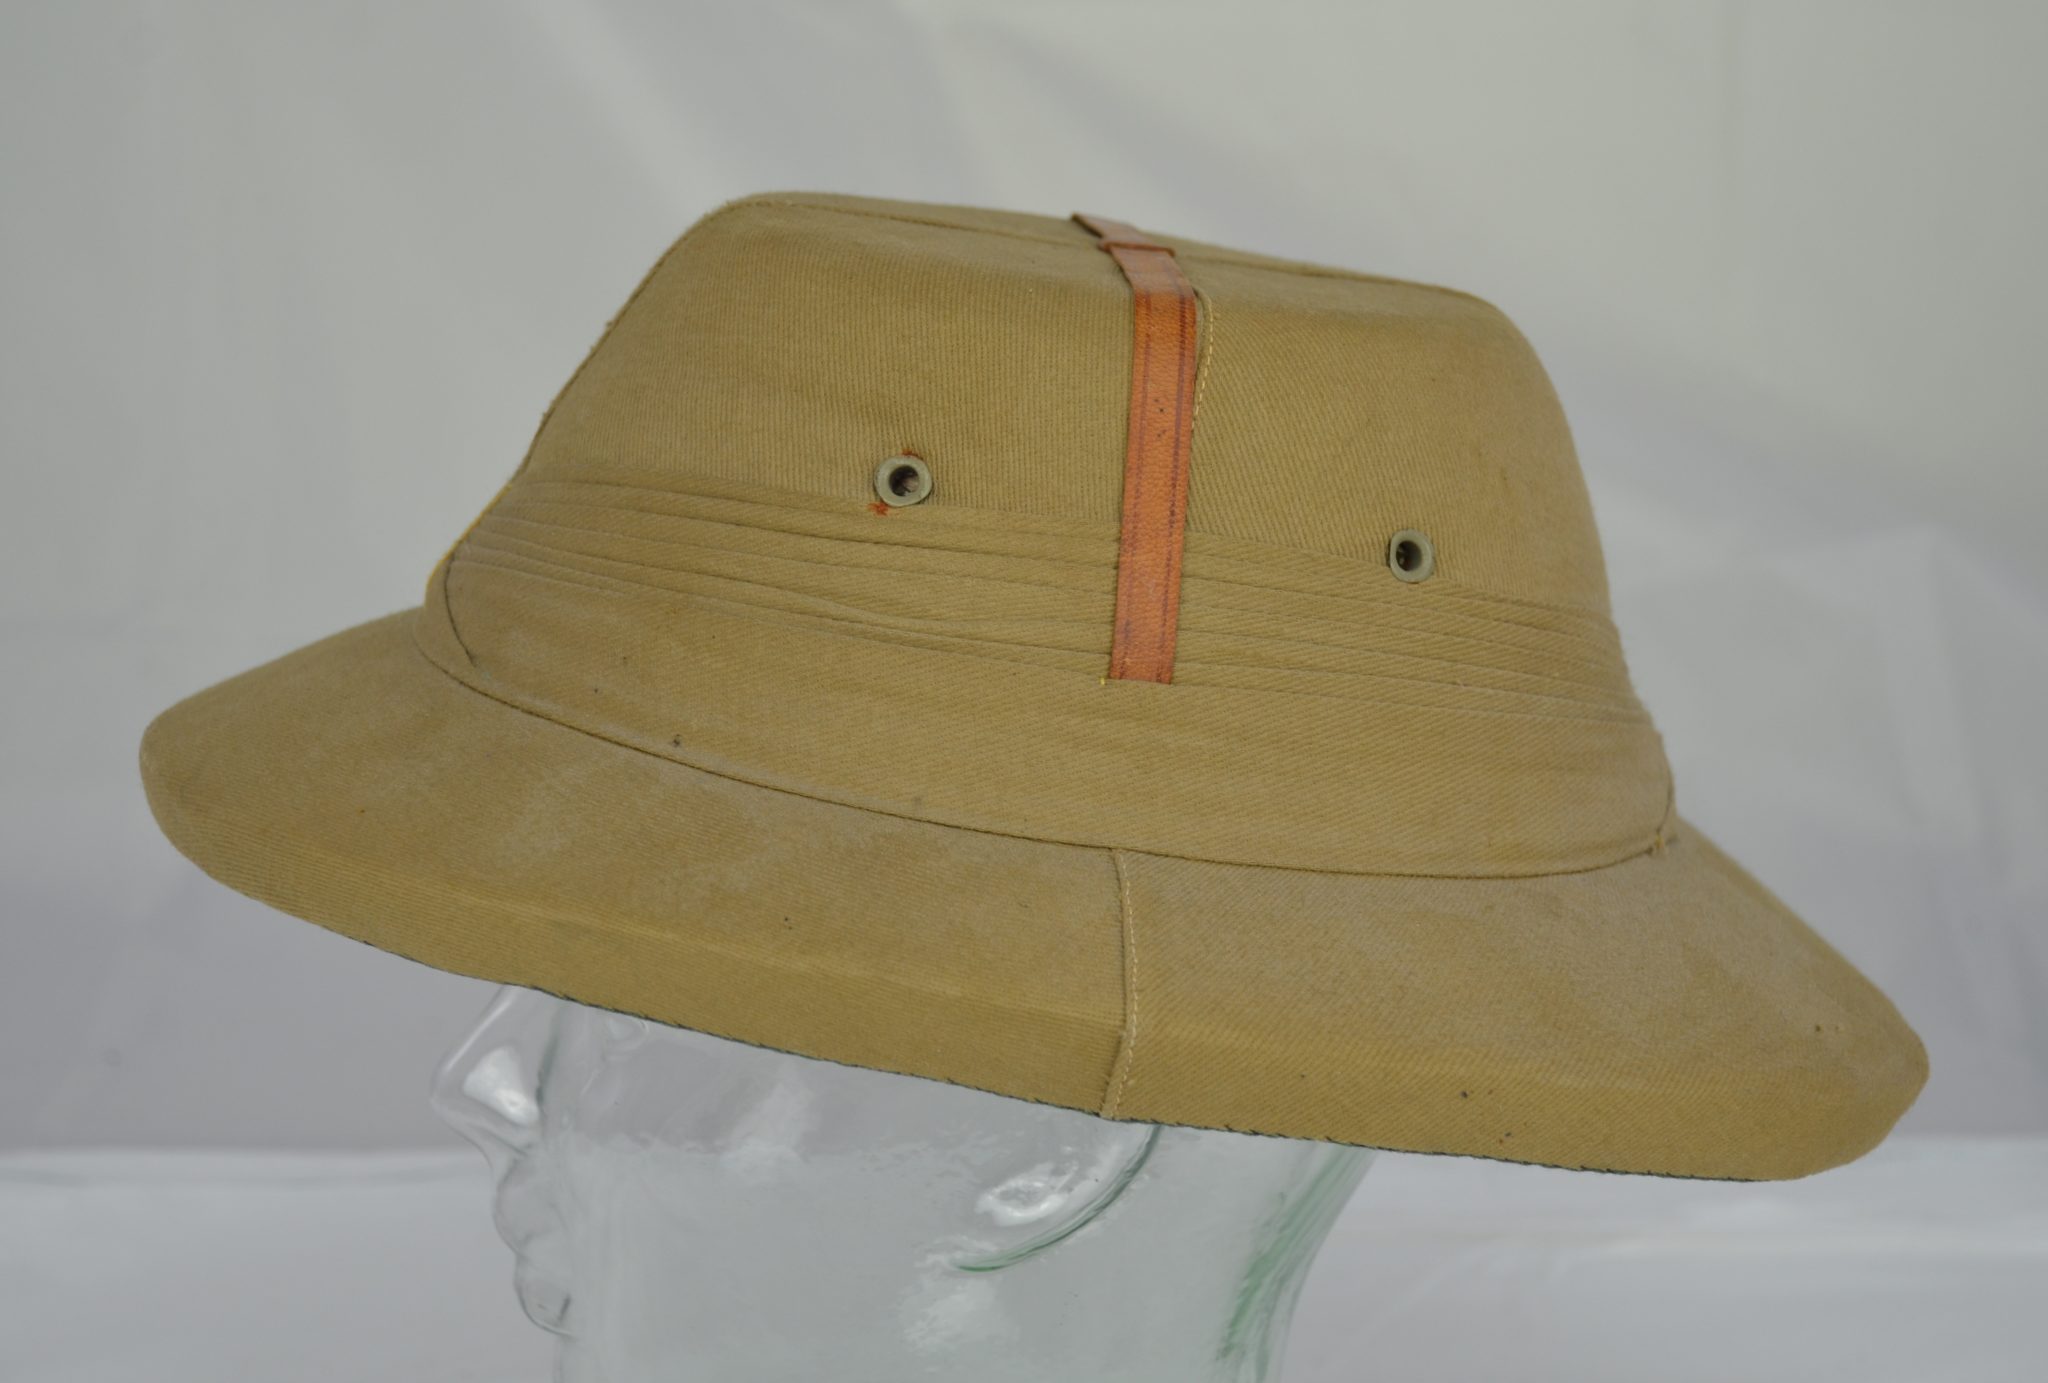 Vintage 1950/60’s Pith Helmet Also Known As Bombay Bowler - Sally Antiques